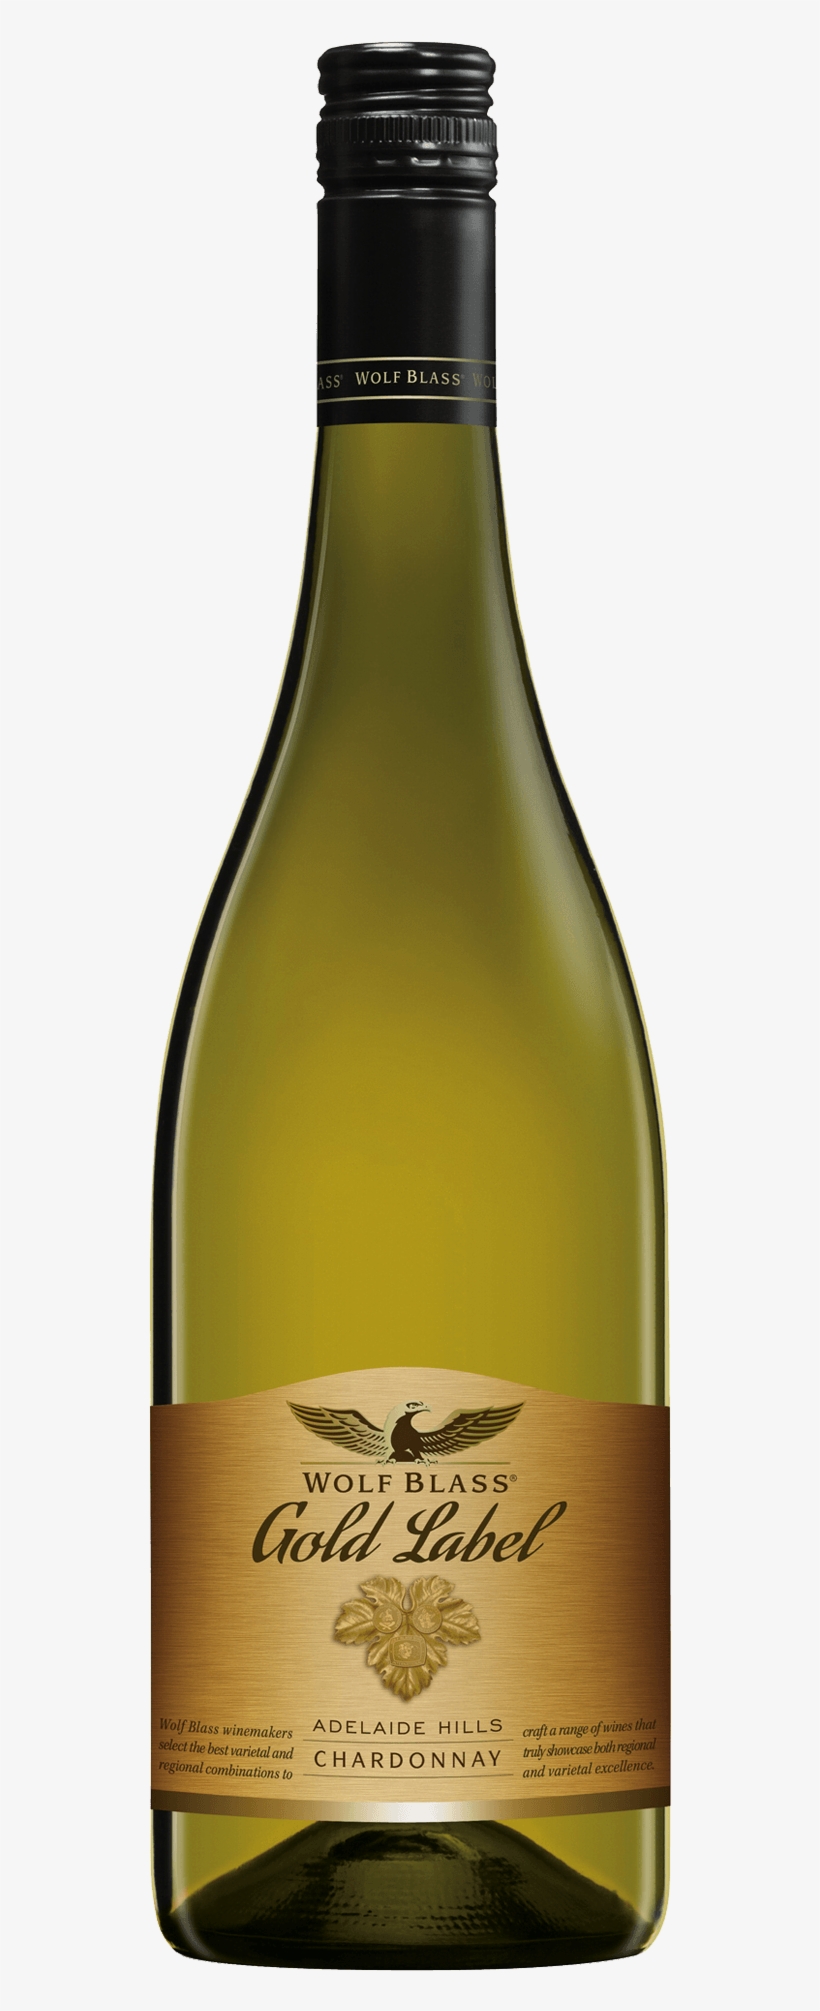 Welcome To Value Cellars - Wolf Blass Chardonnay Gold Label, transparent png #7666043